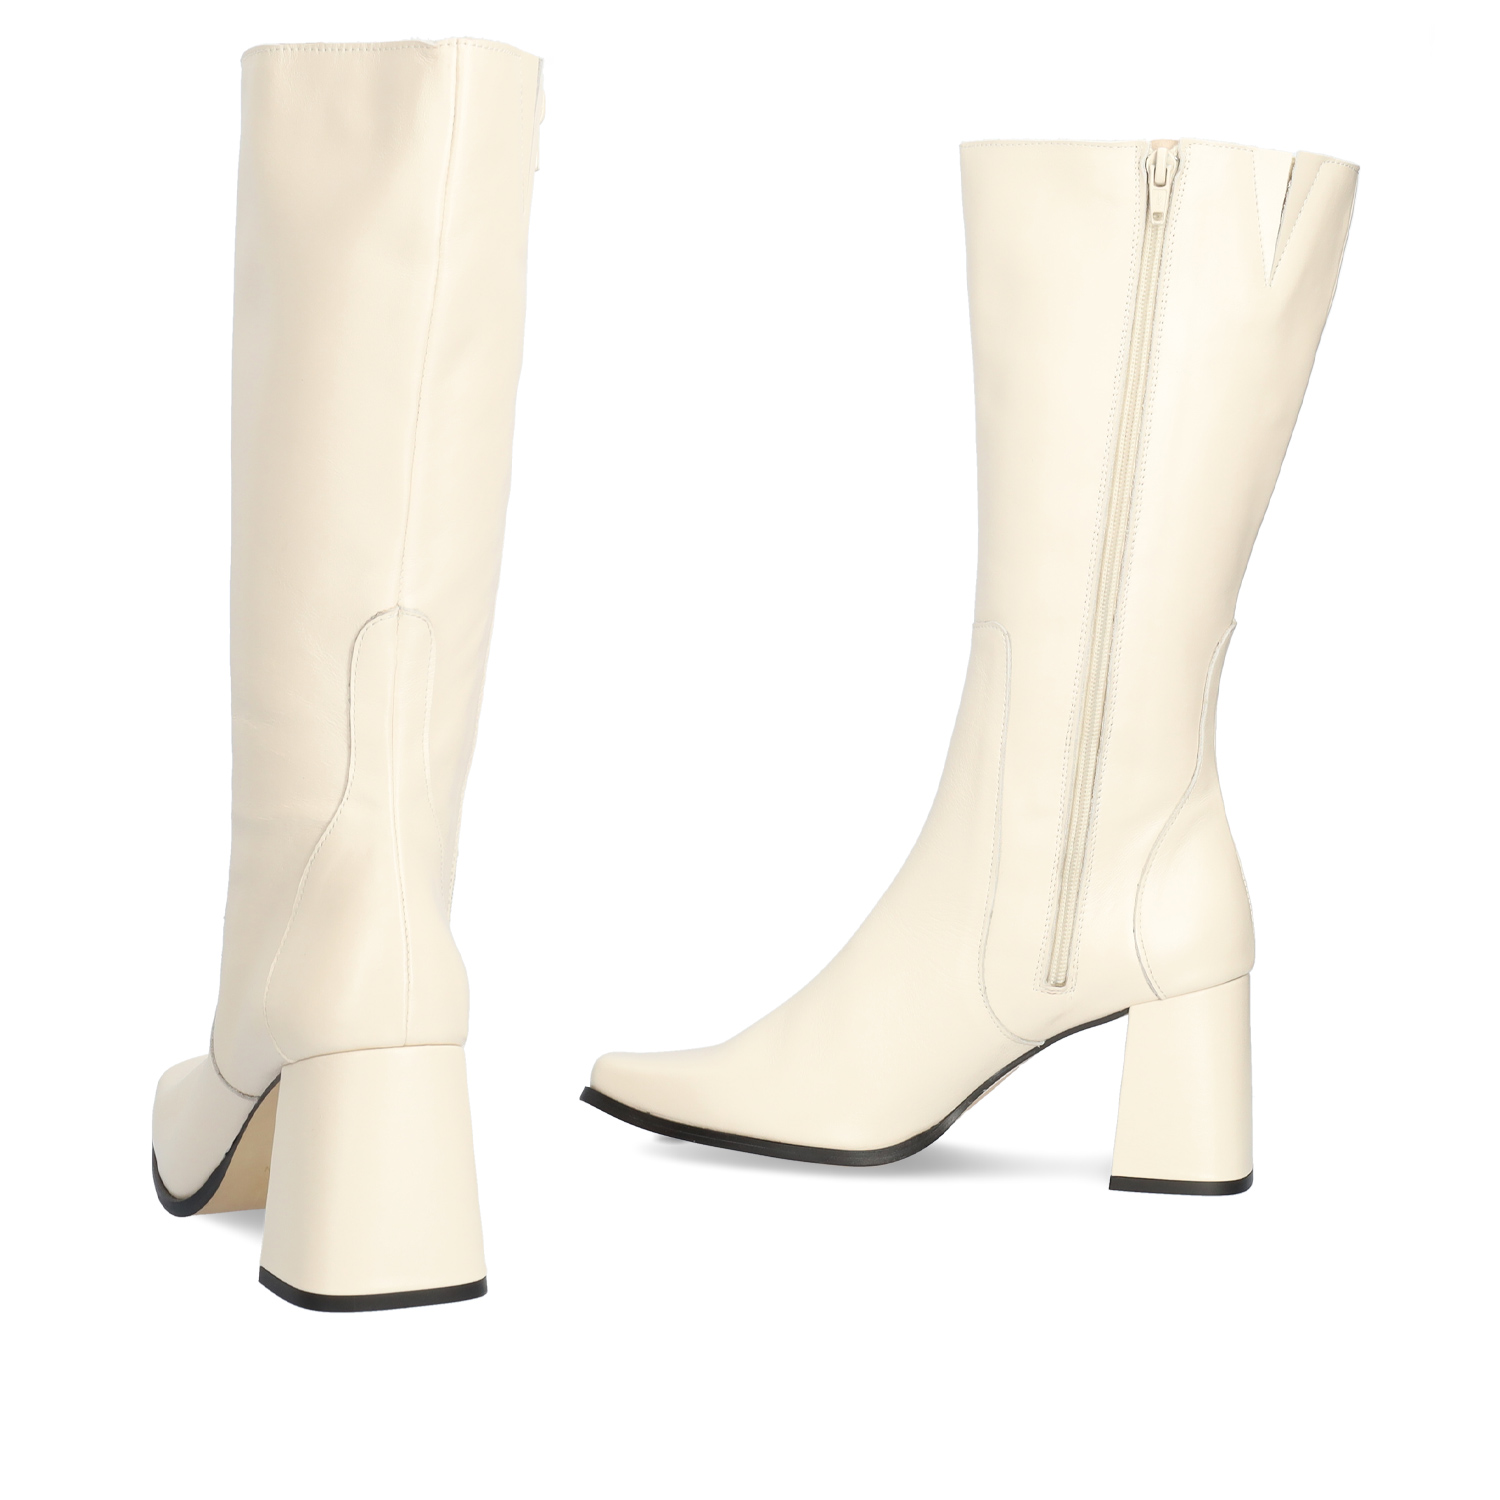 Heeled boots in off-white leather 